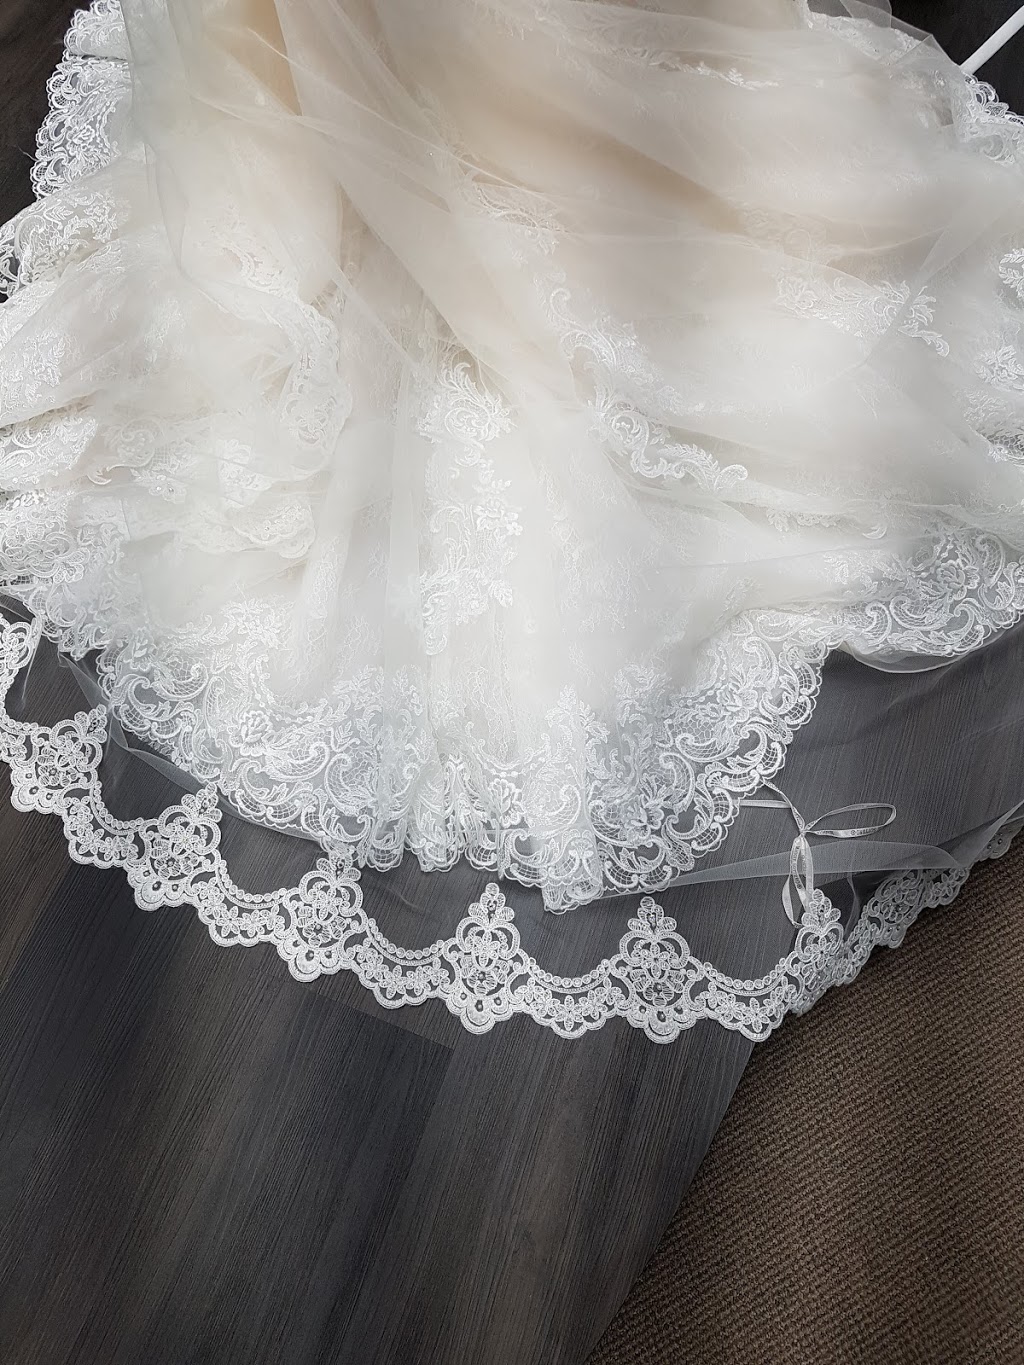 Bliss Bridal Boutique | clothing store | 19 Sawdon Dr, Whitby, ON L1N 9E9, Canada | 9057219775 OR +1 905-721-9775